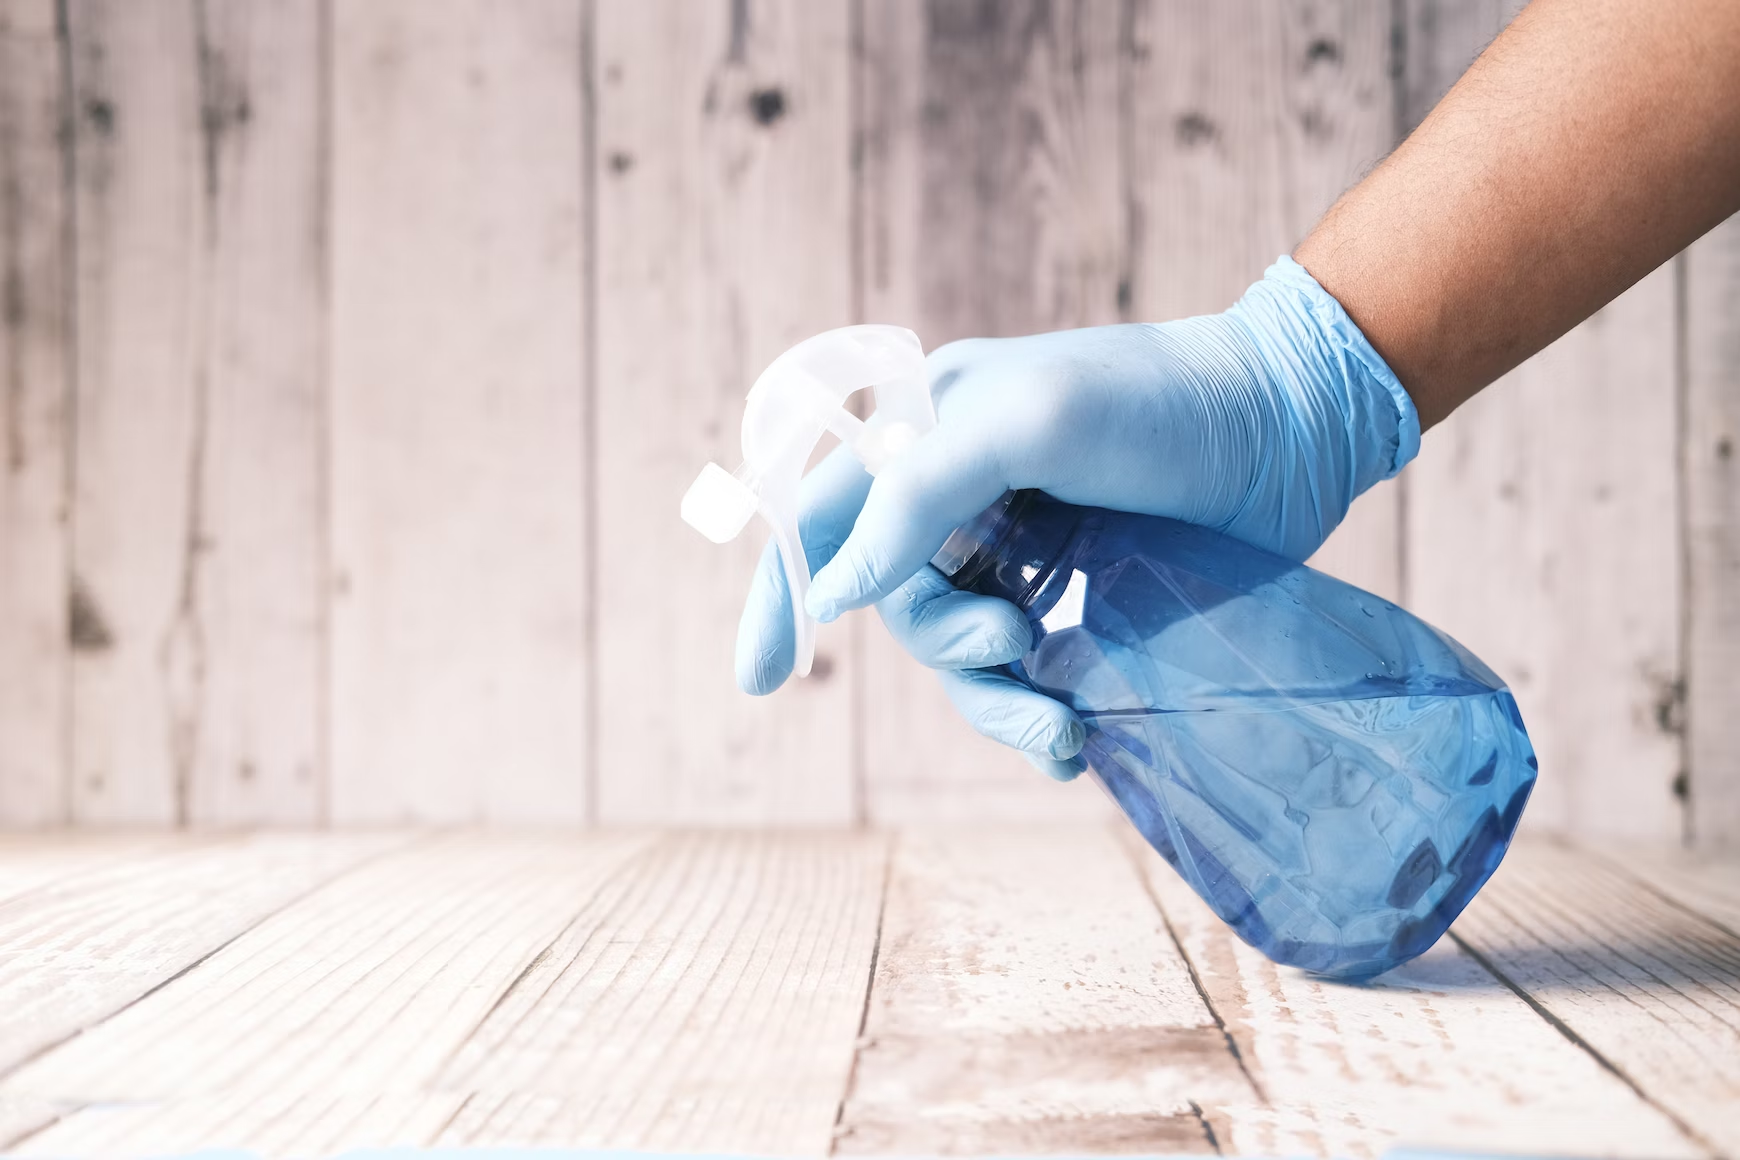 A person wears gloves while cleaning to minimize allergies and irritation.